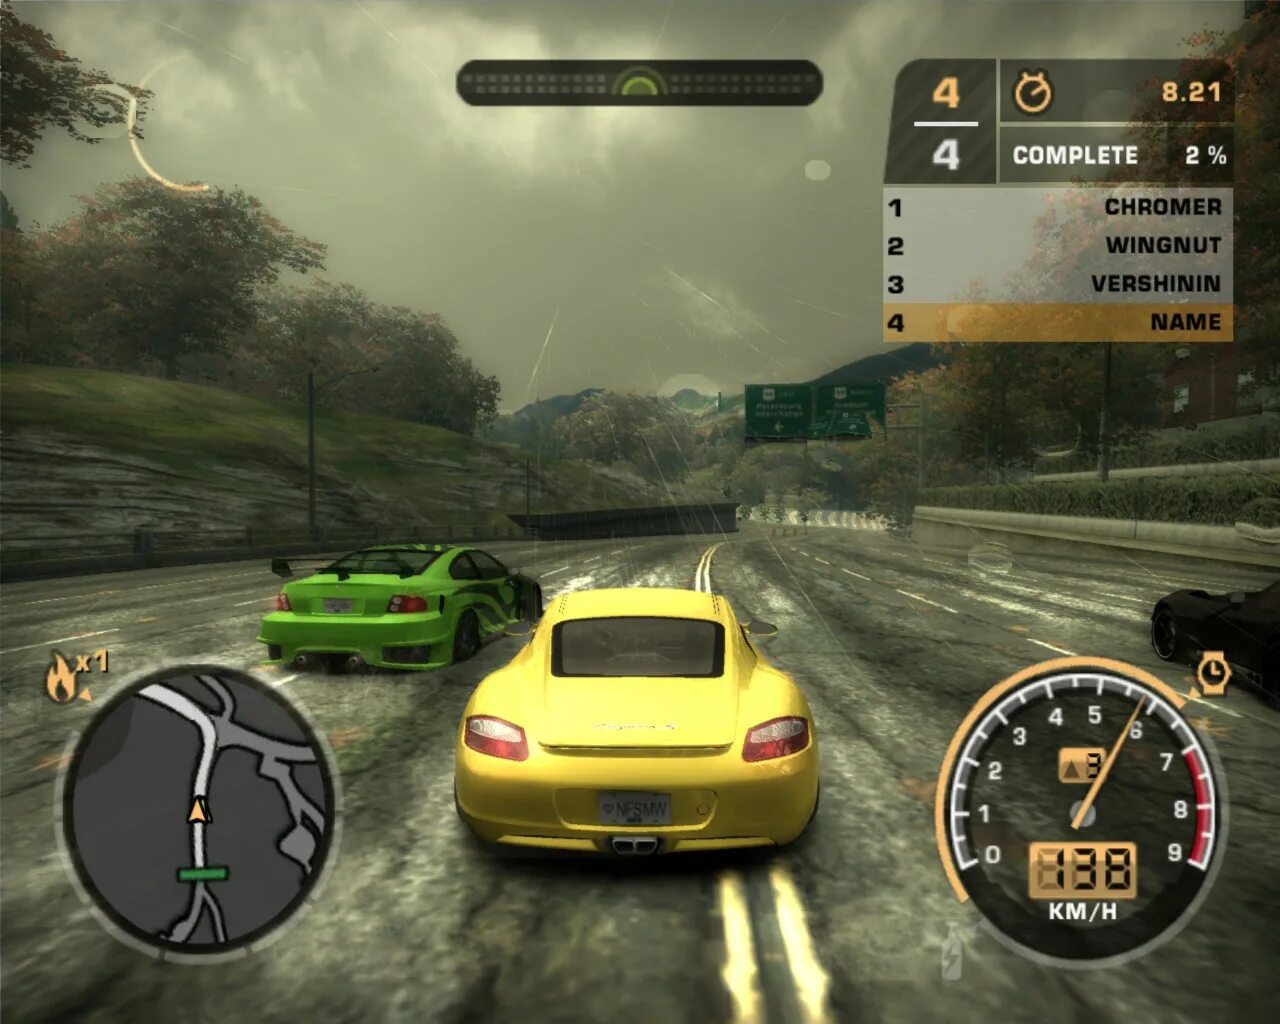 Need for Speed most wanted 2005 ps2. NFS MW 2005 ps2. NFS MW 2005 ps2 Demo. NFS most wanted 2005 ps2 управление. Nfs mw 2